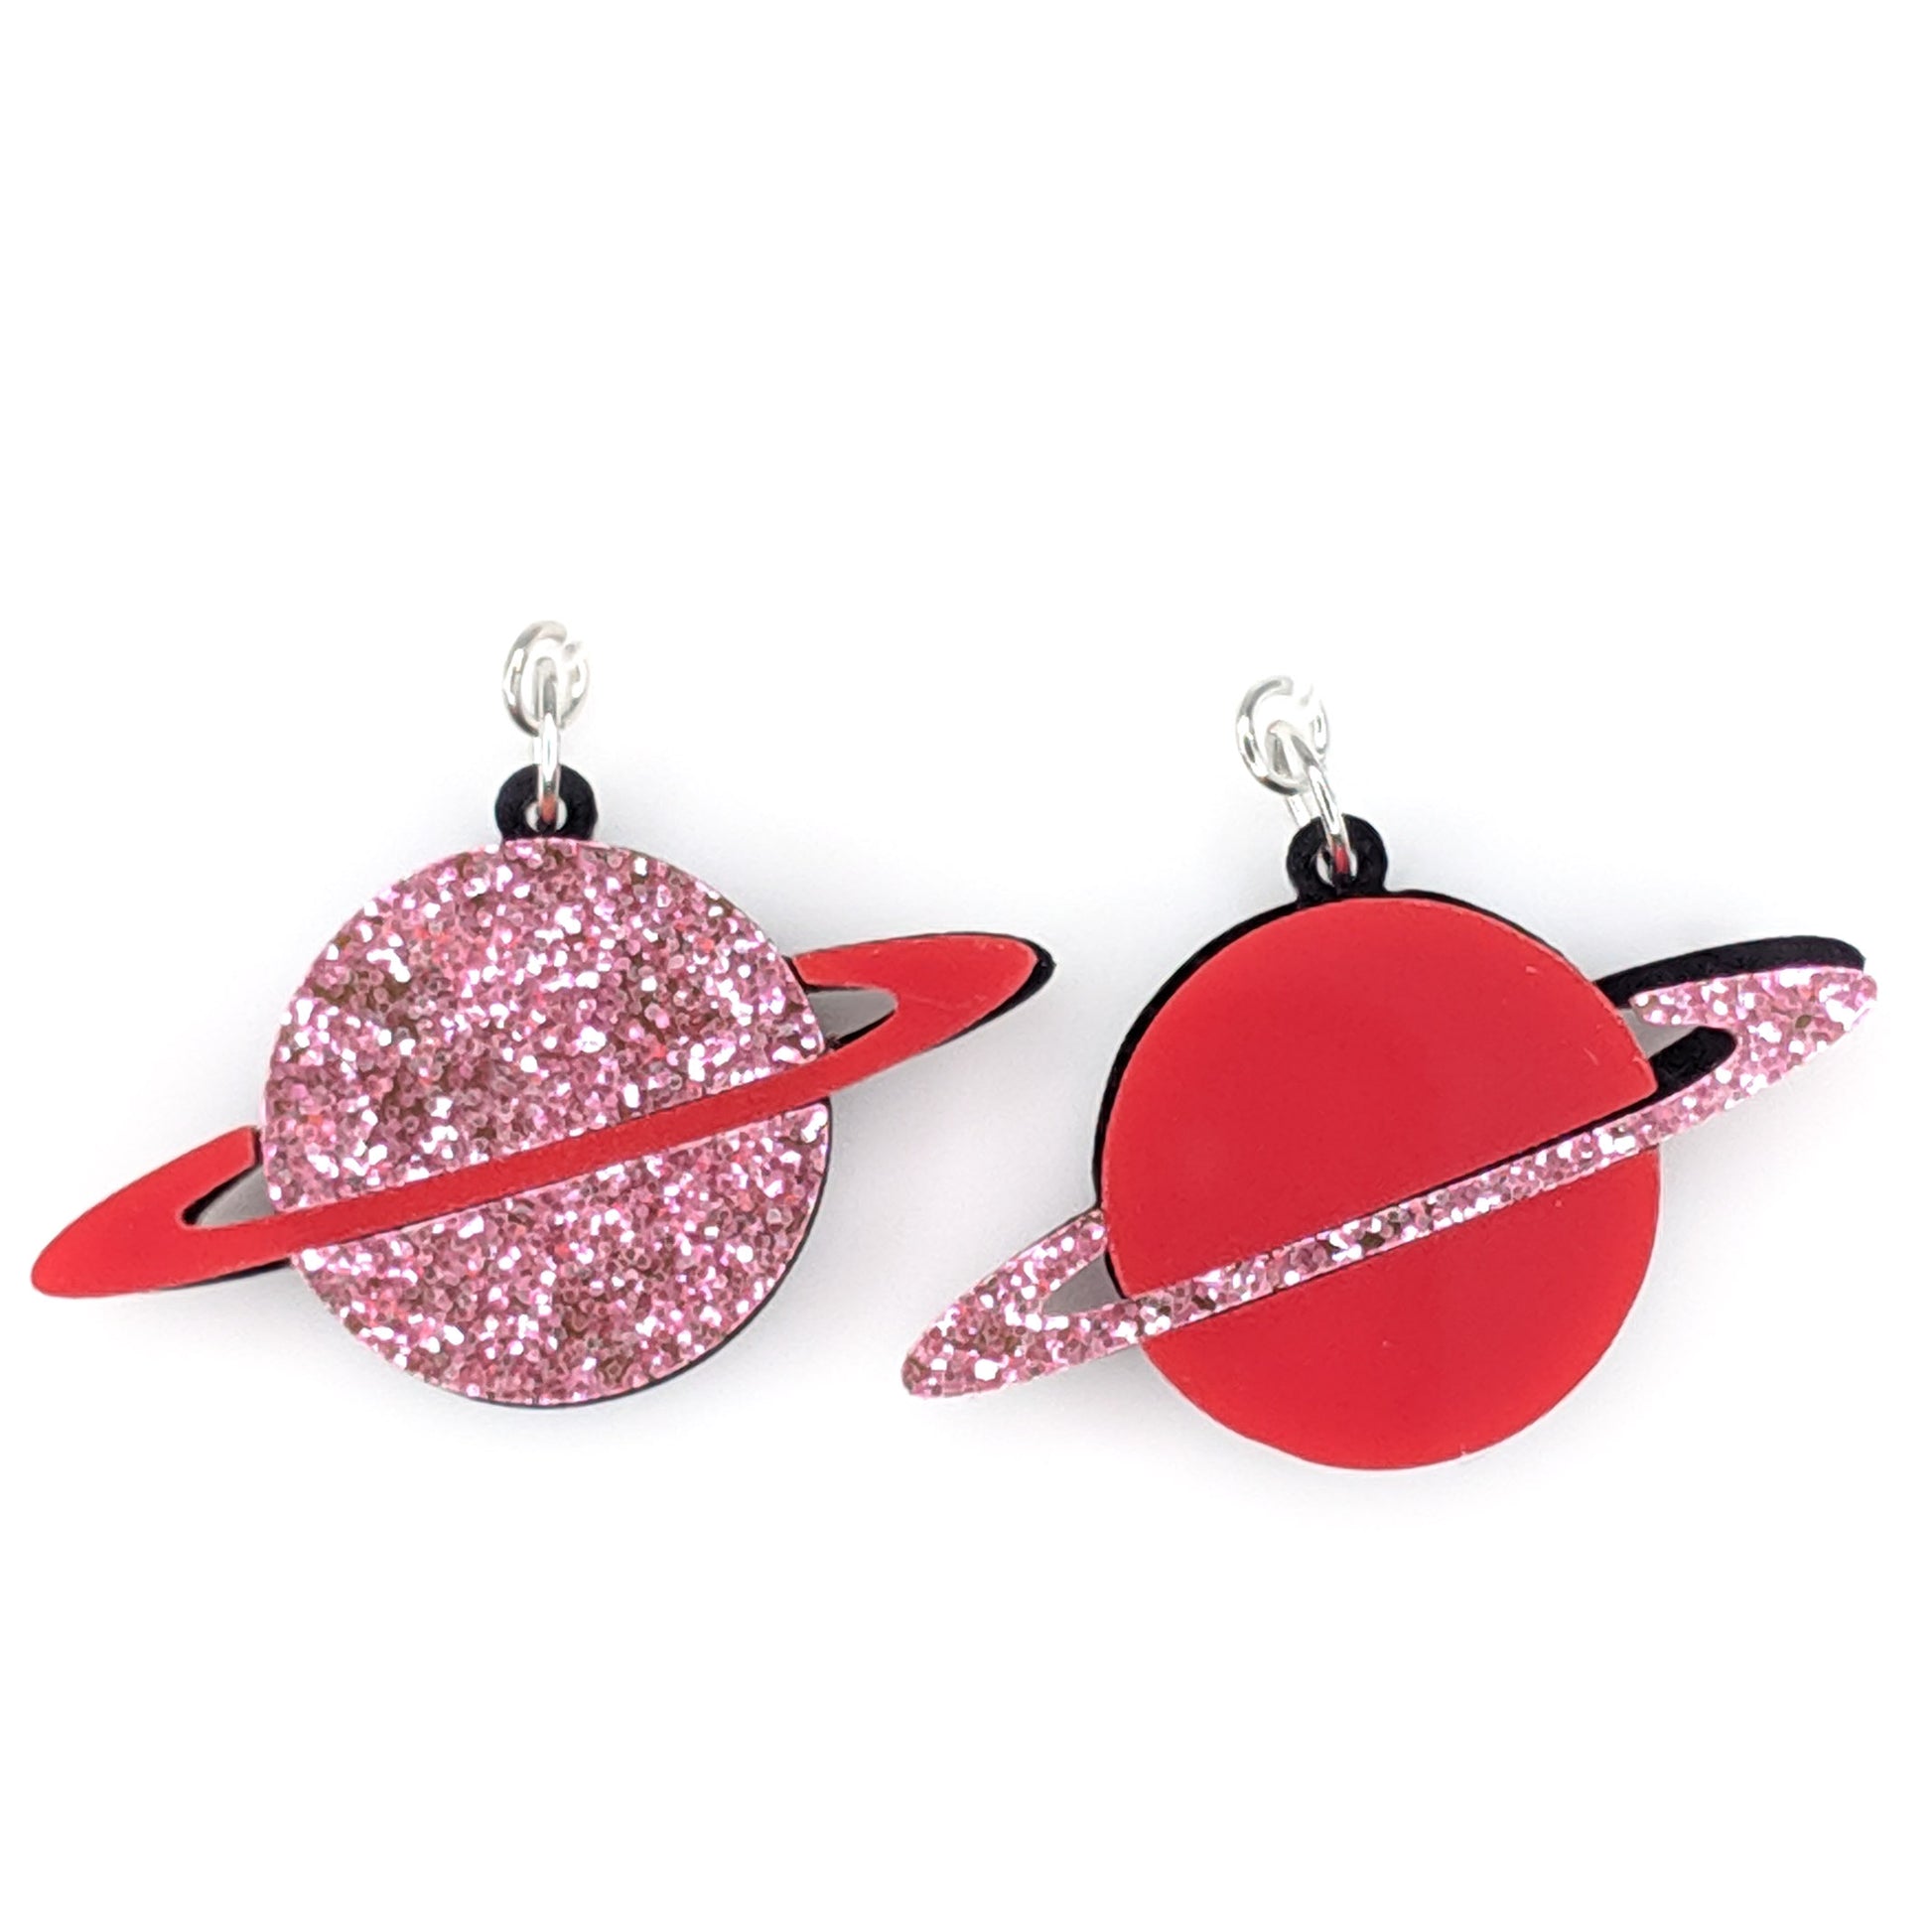 Ringed Planet Earrings (Dangles) - red and pink